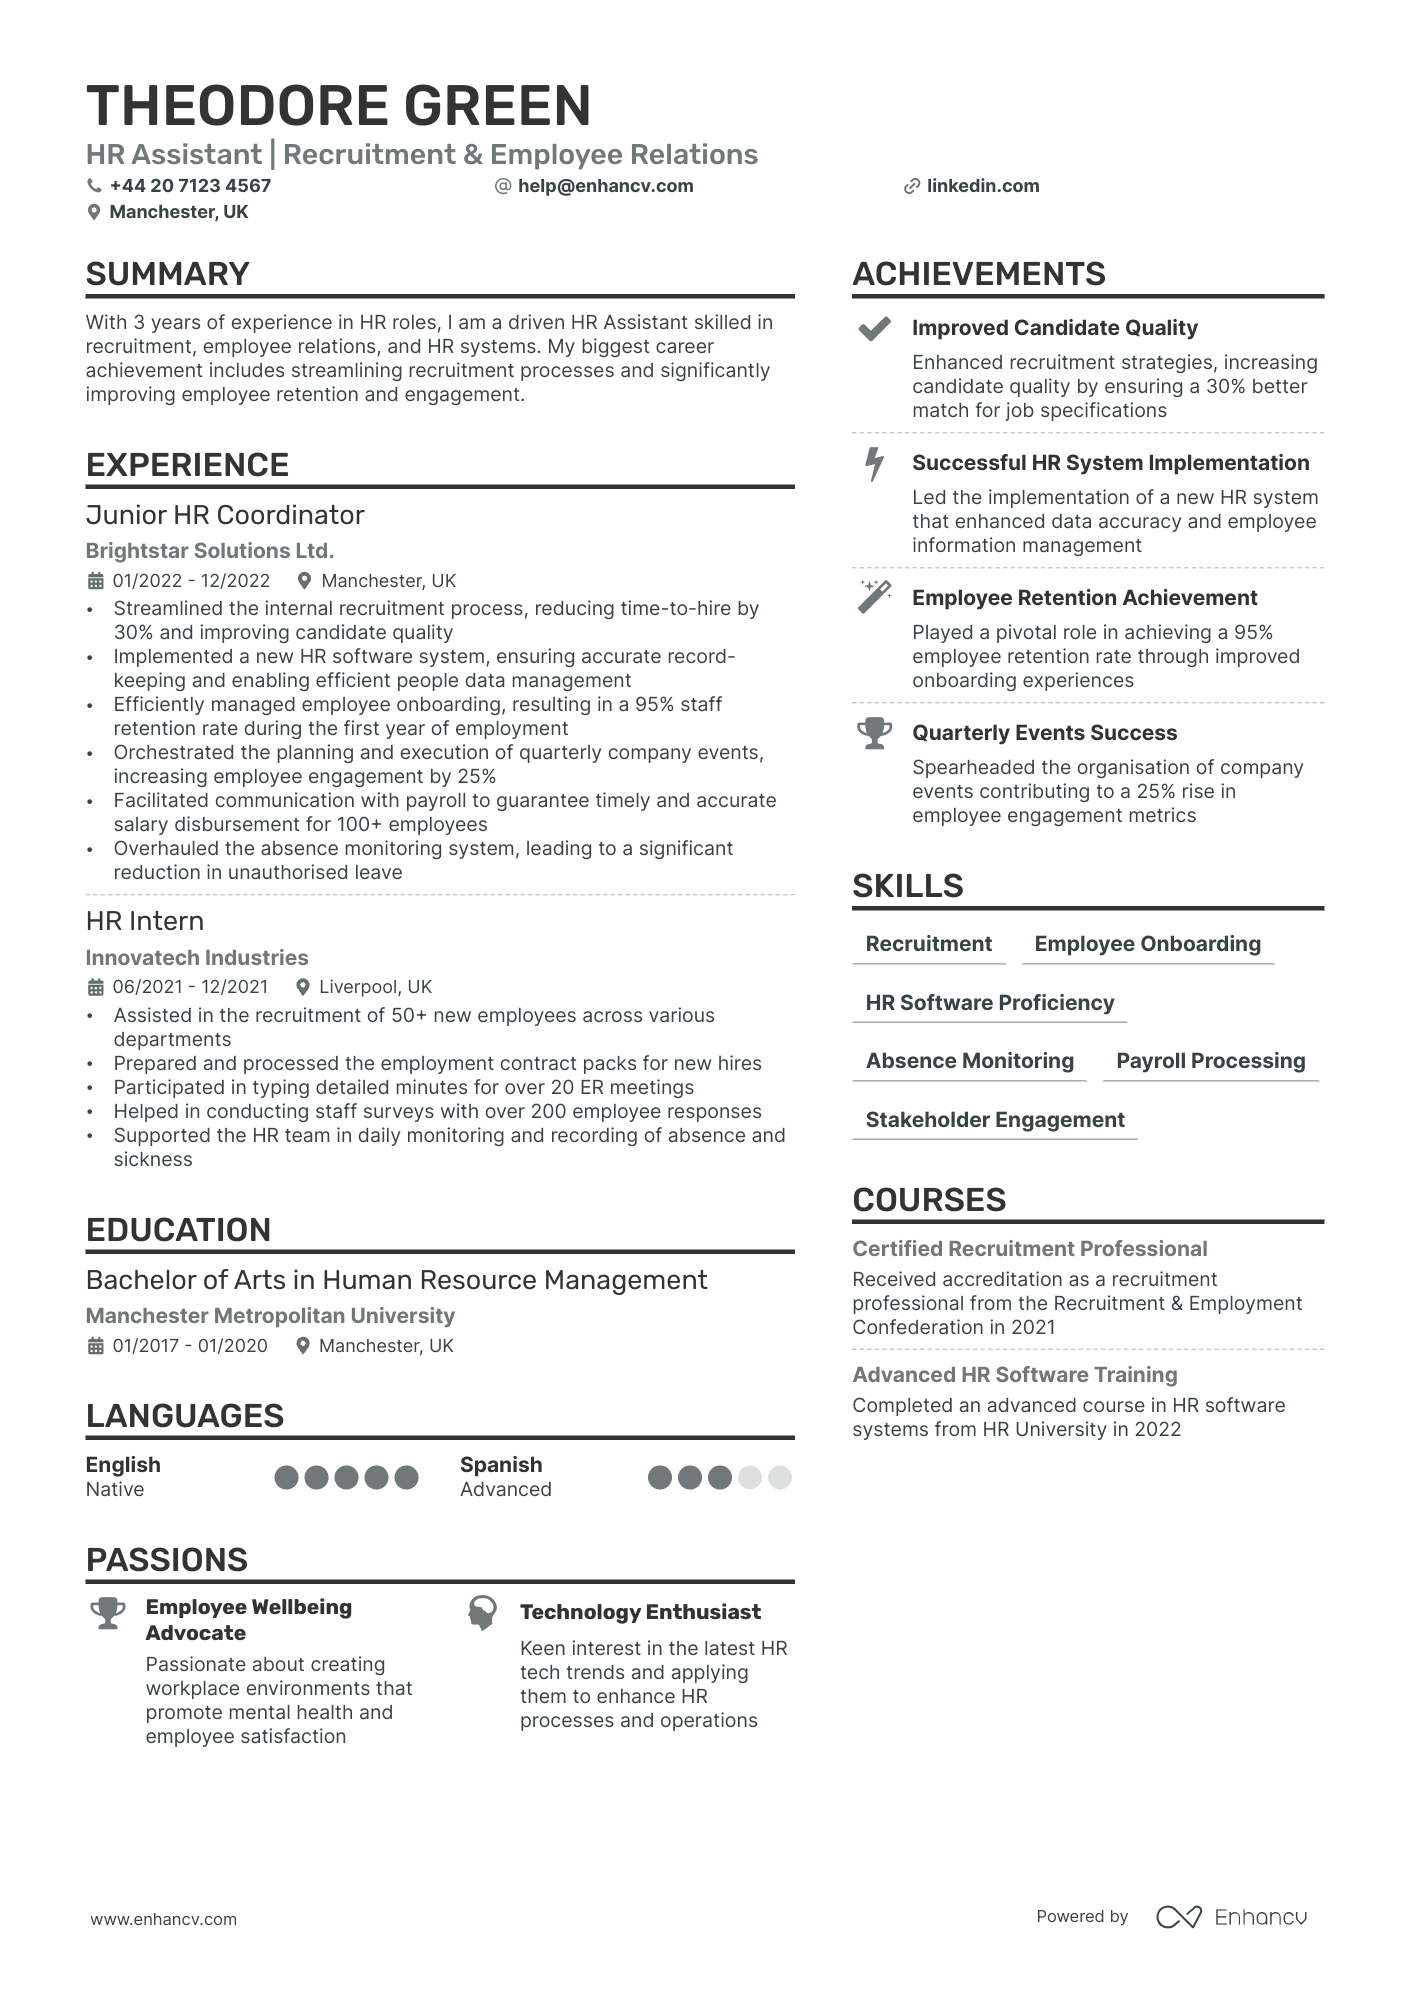 HR Assistant cv example